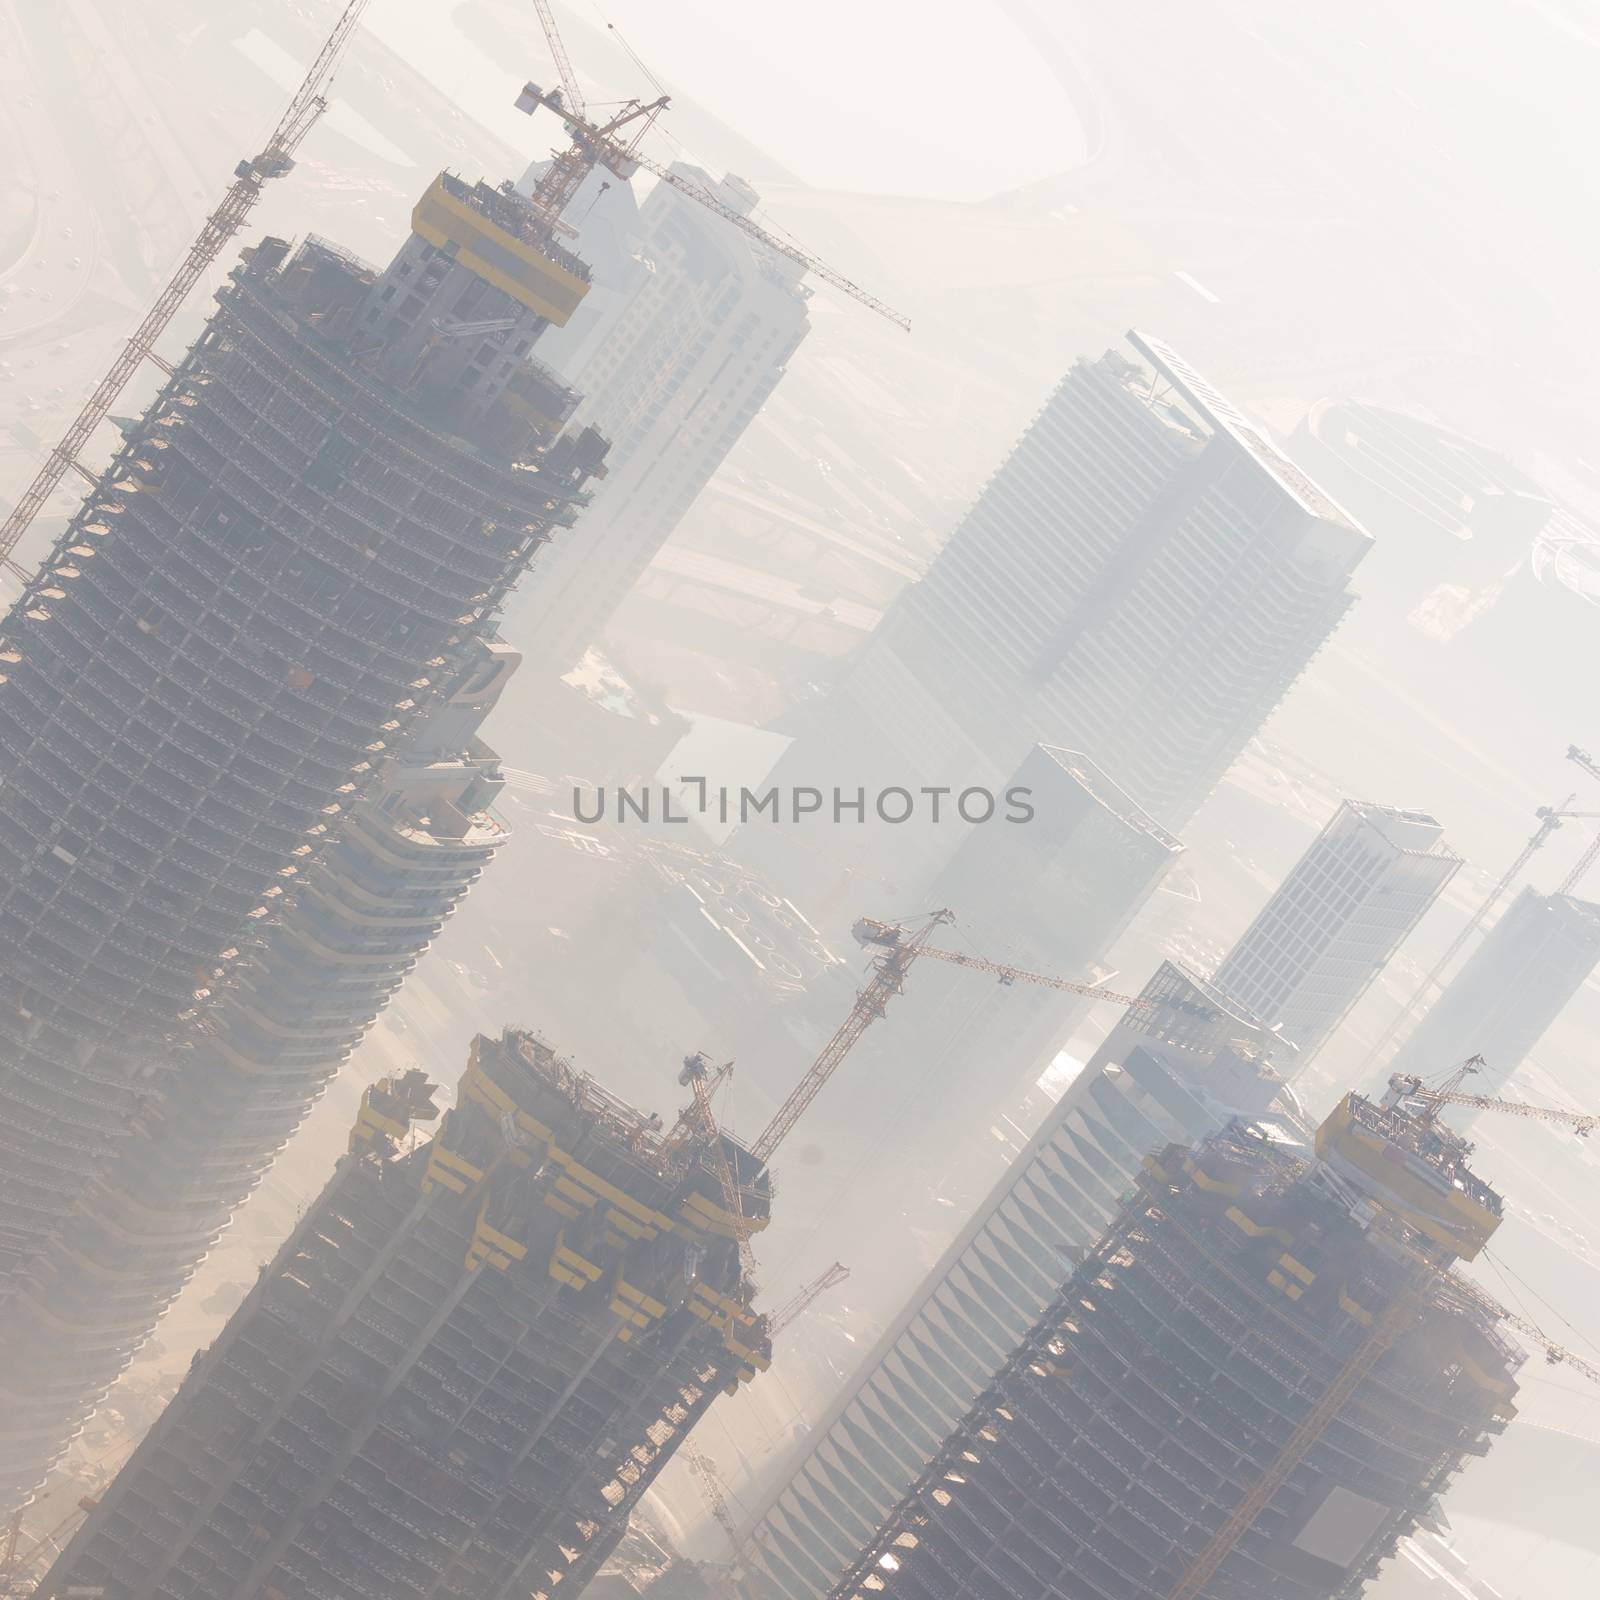 Huge skyscrappers construction site with cranes on top of buildings. Rapid urban and construction sector development or inflation of real estate bubble.